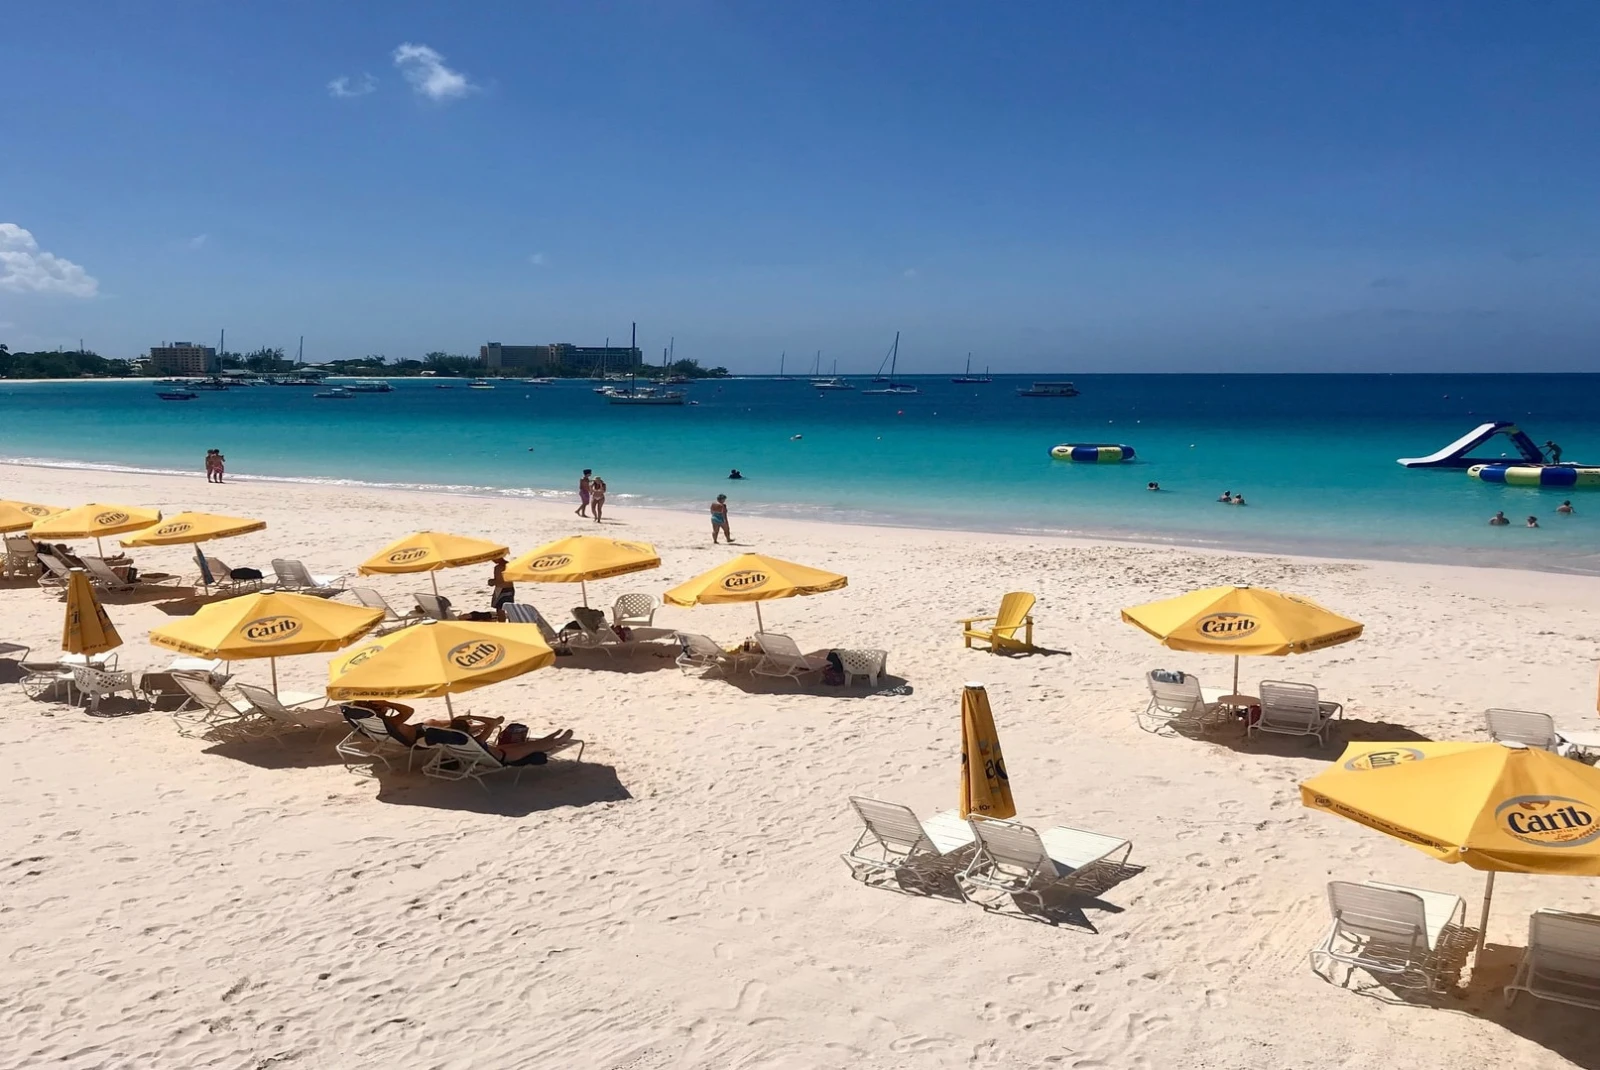 The Boatyard Beach Club is one of the most amazing white sand beaches in the world.